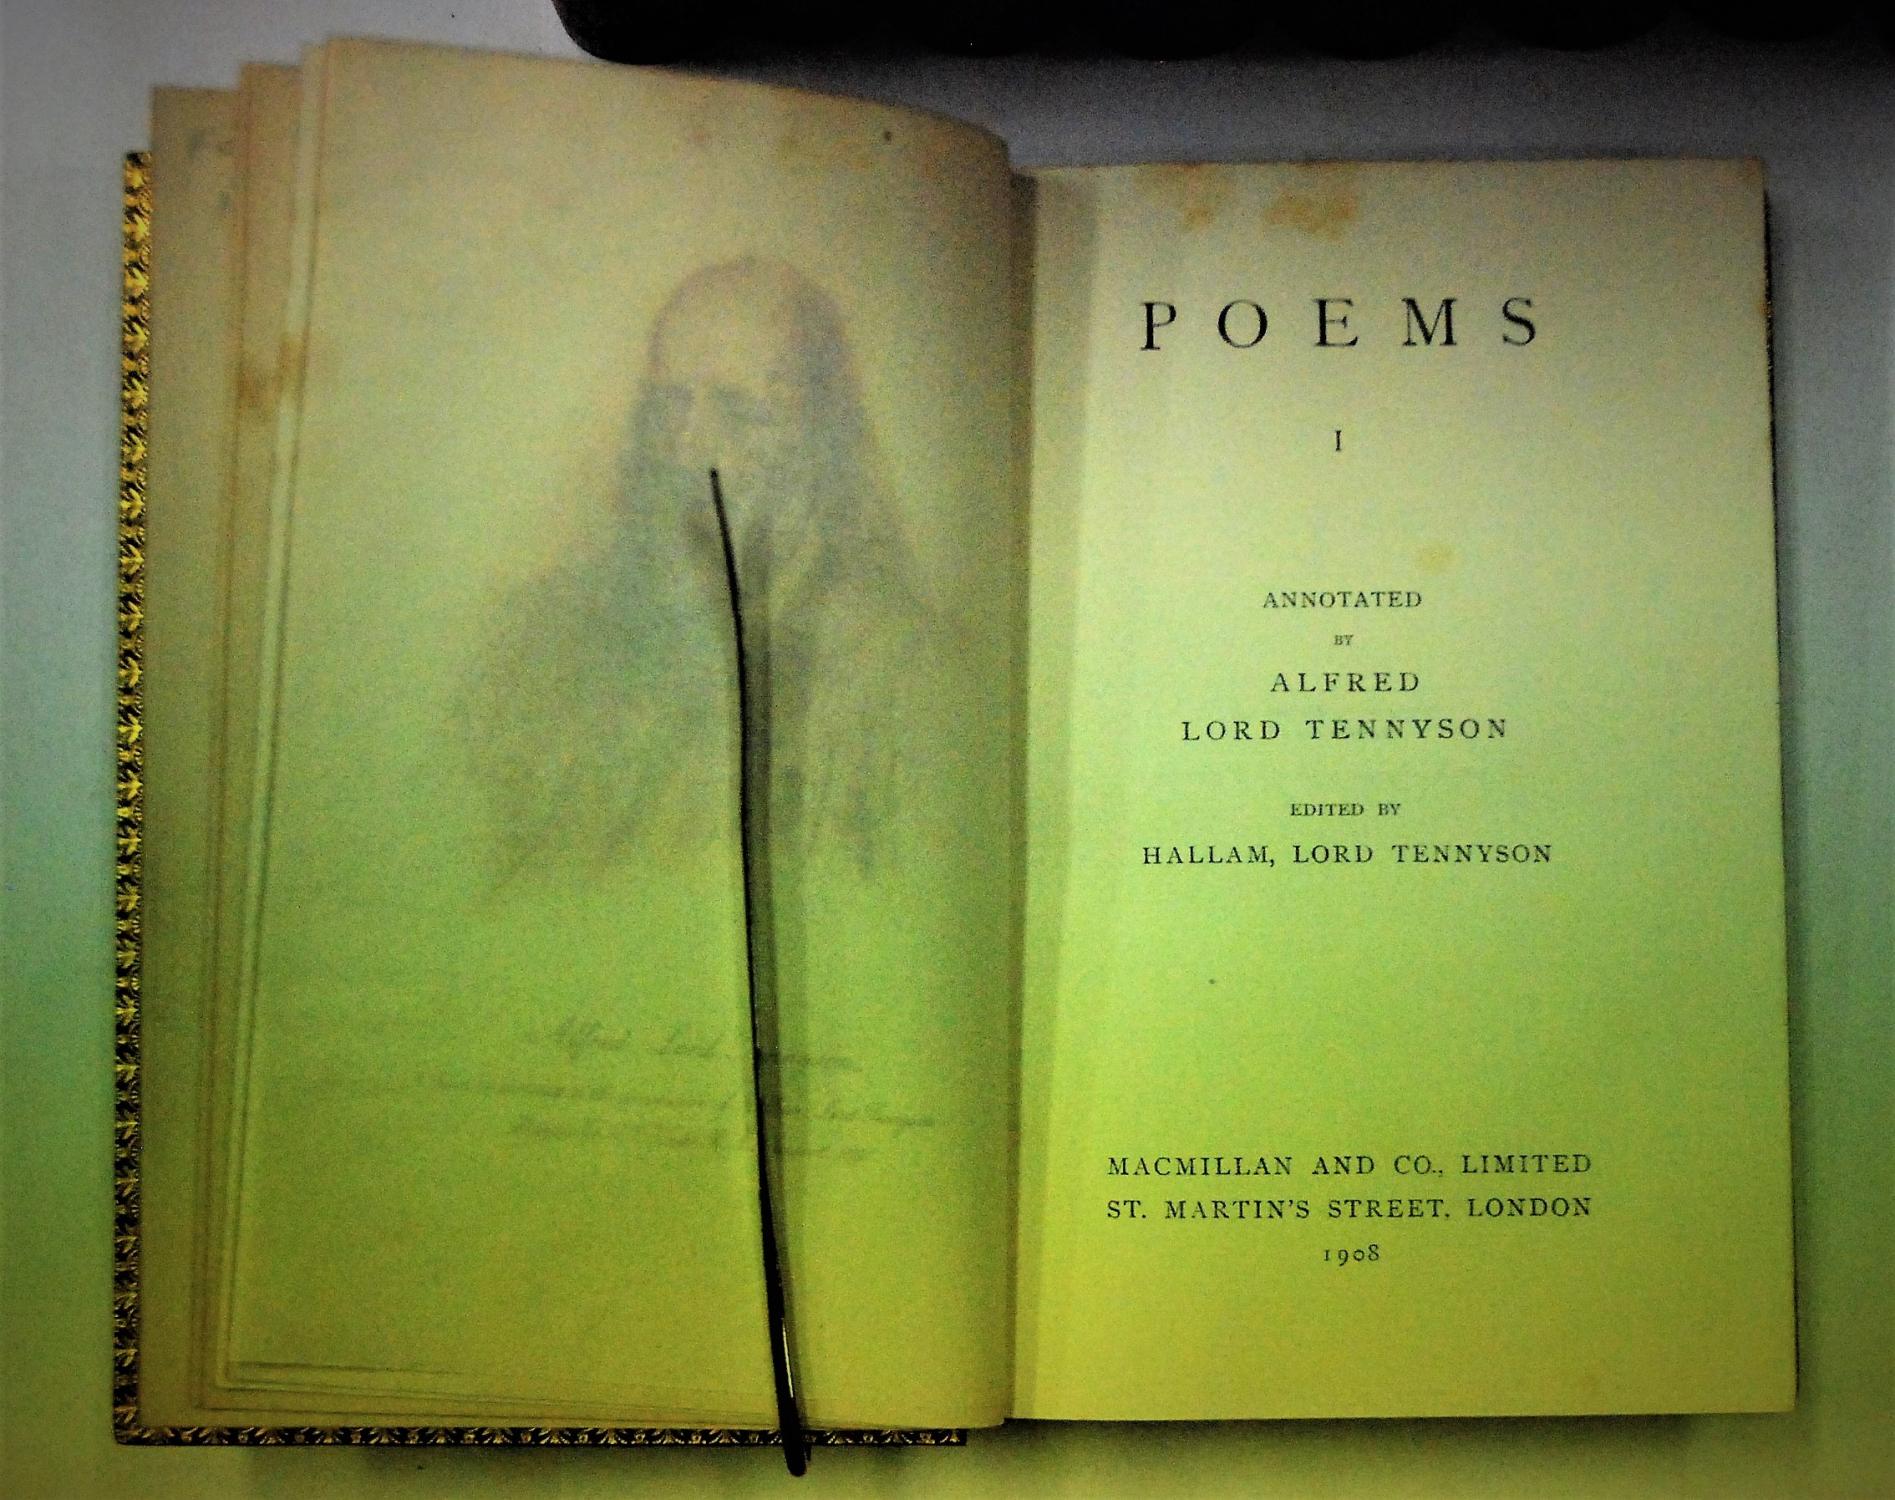 Poems. Annoted by Alfred, Lord Tennyson. Edited by Hallam, Lord ...